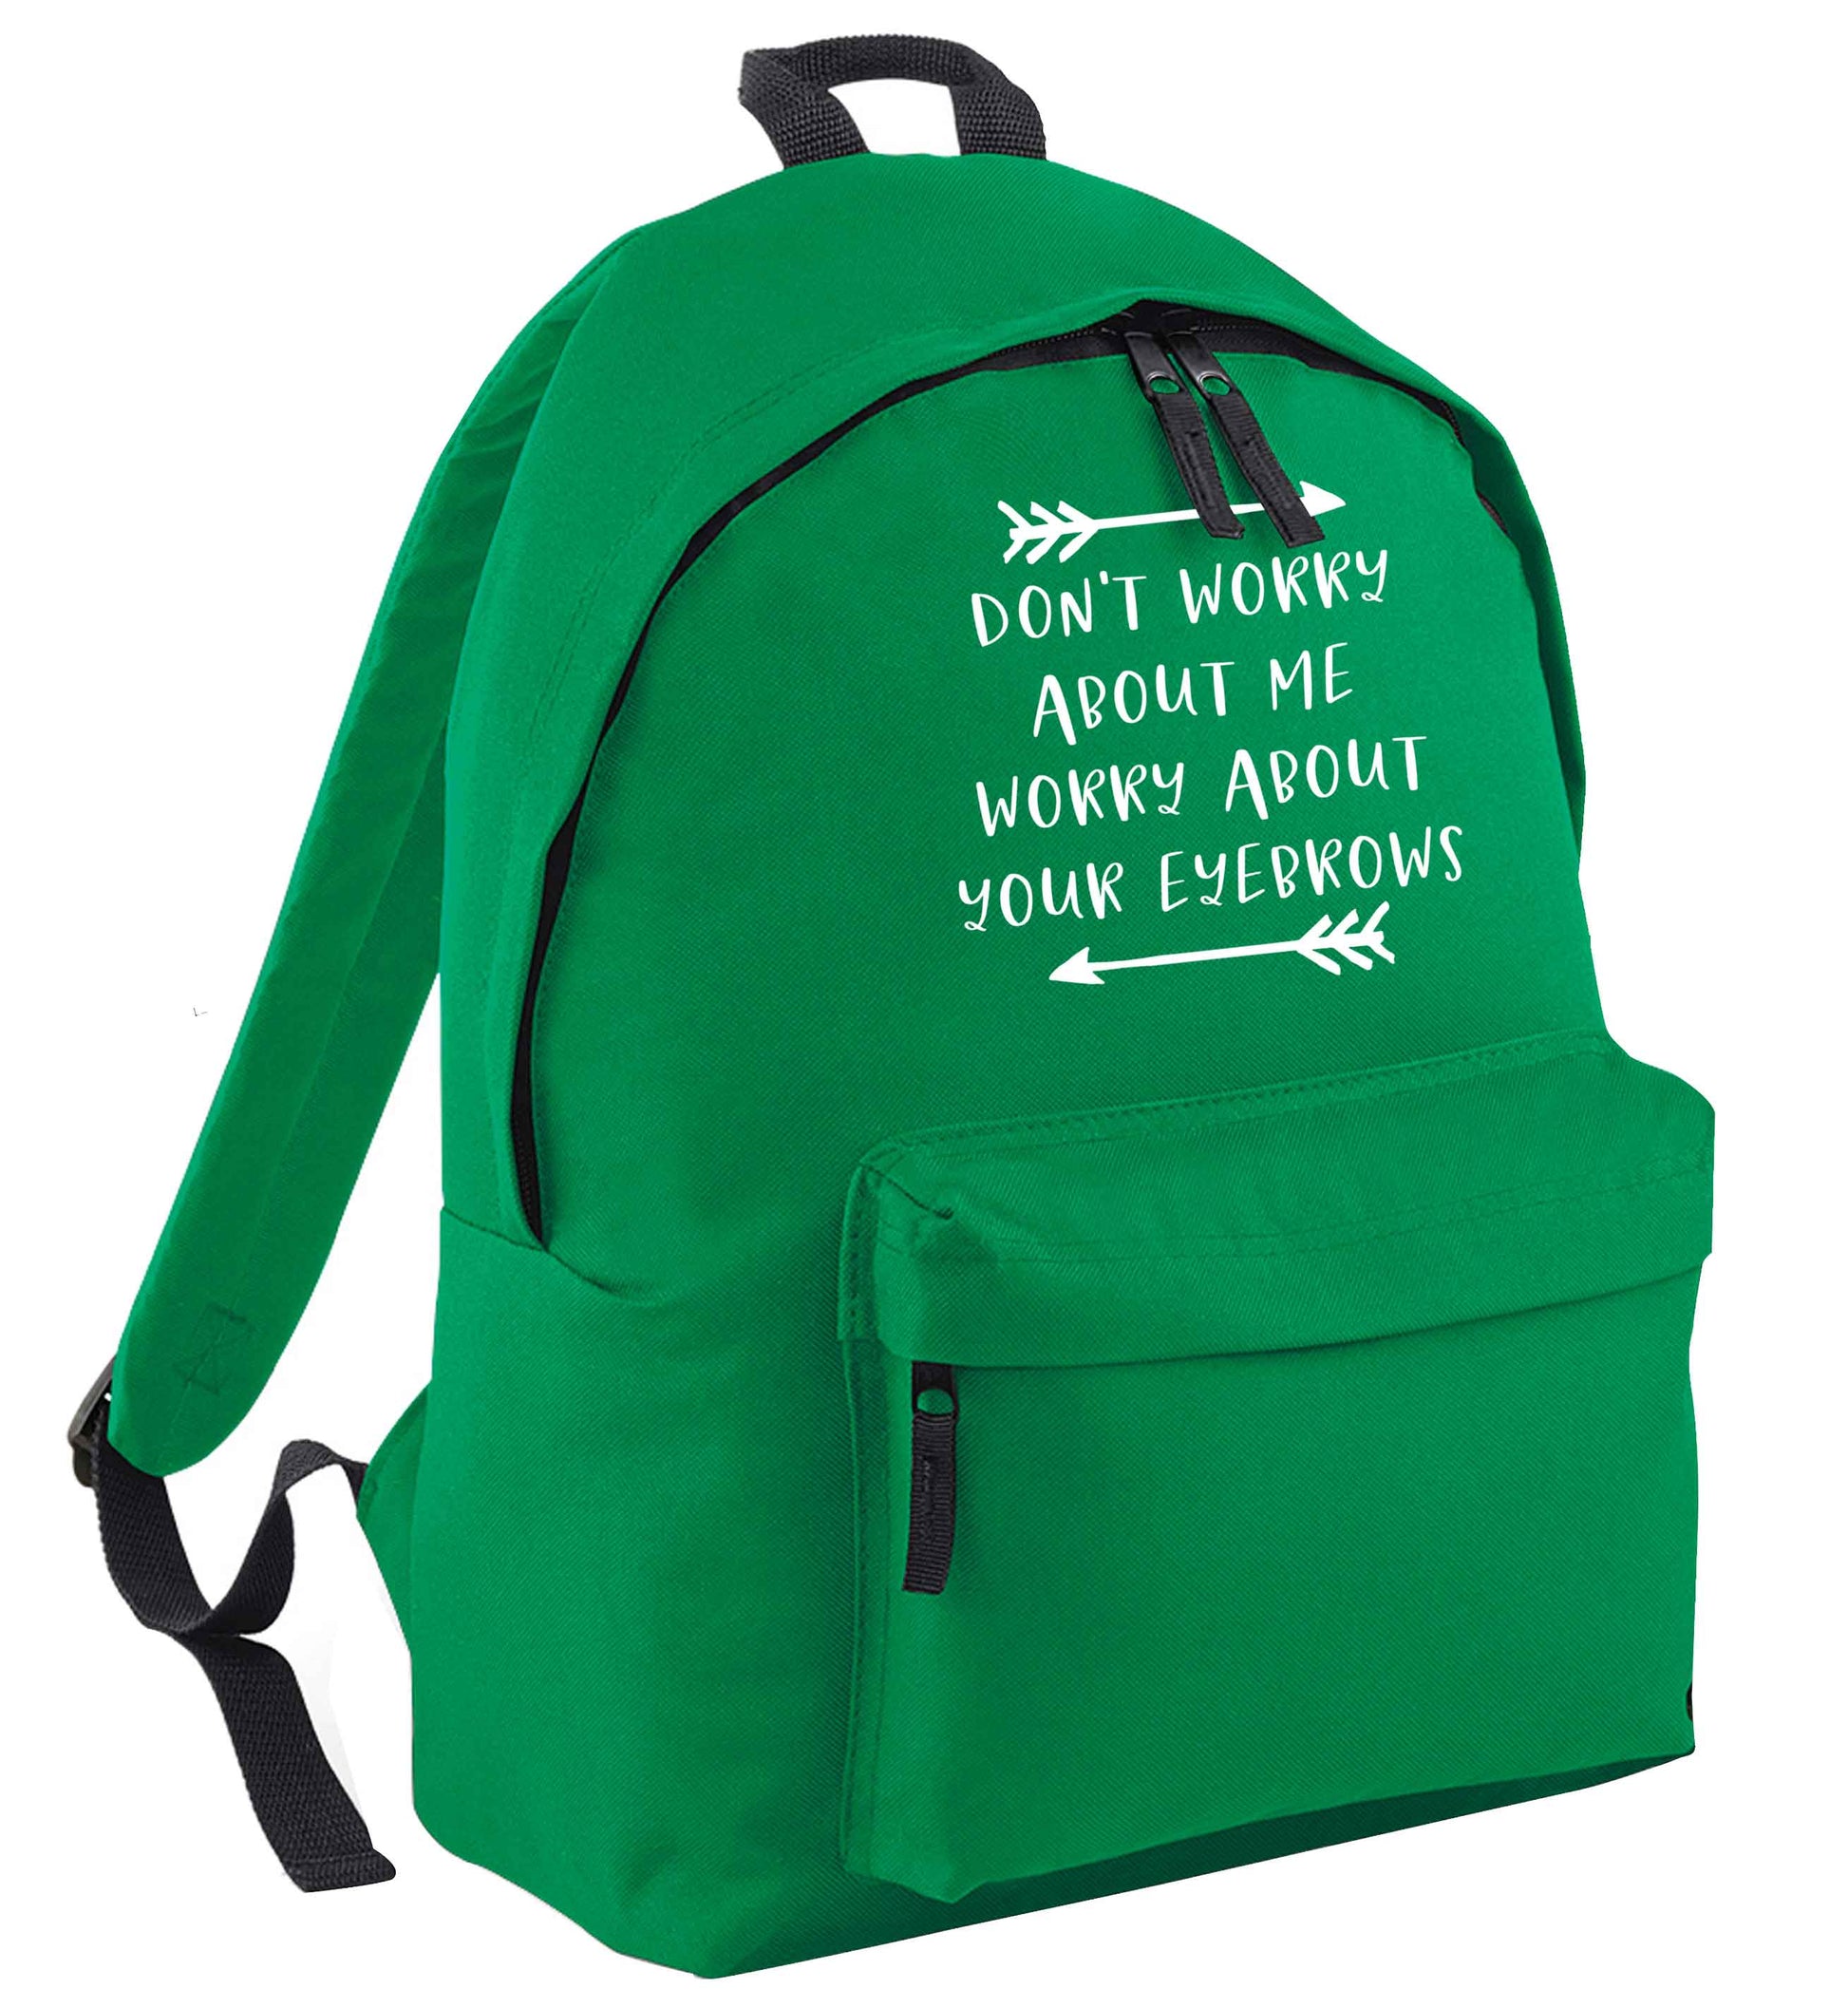 Don't worry about me worry about your eyebrows green adults backpack